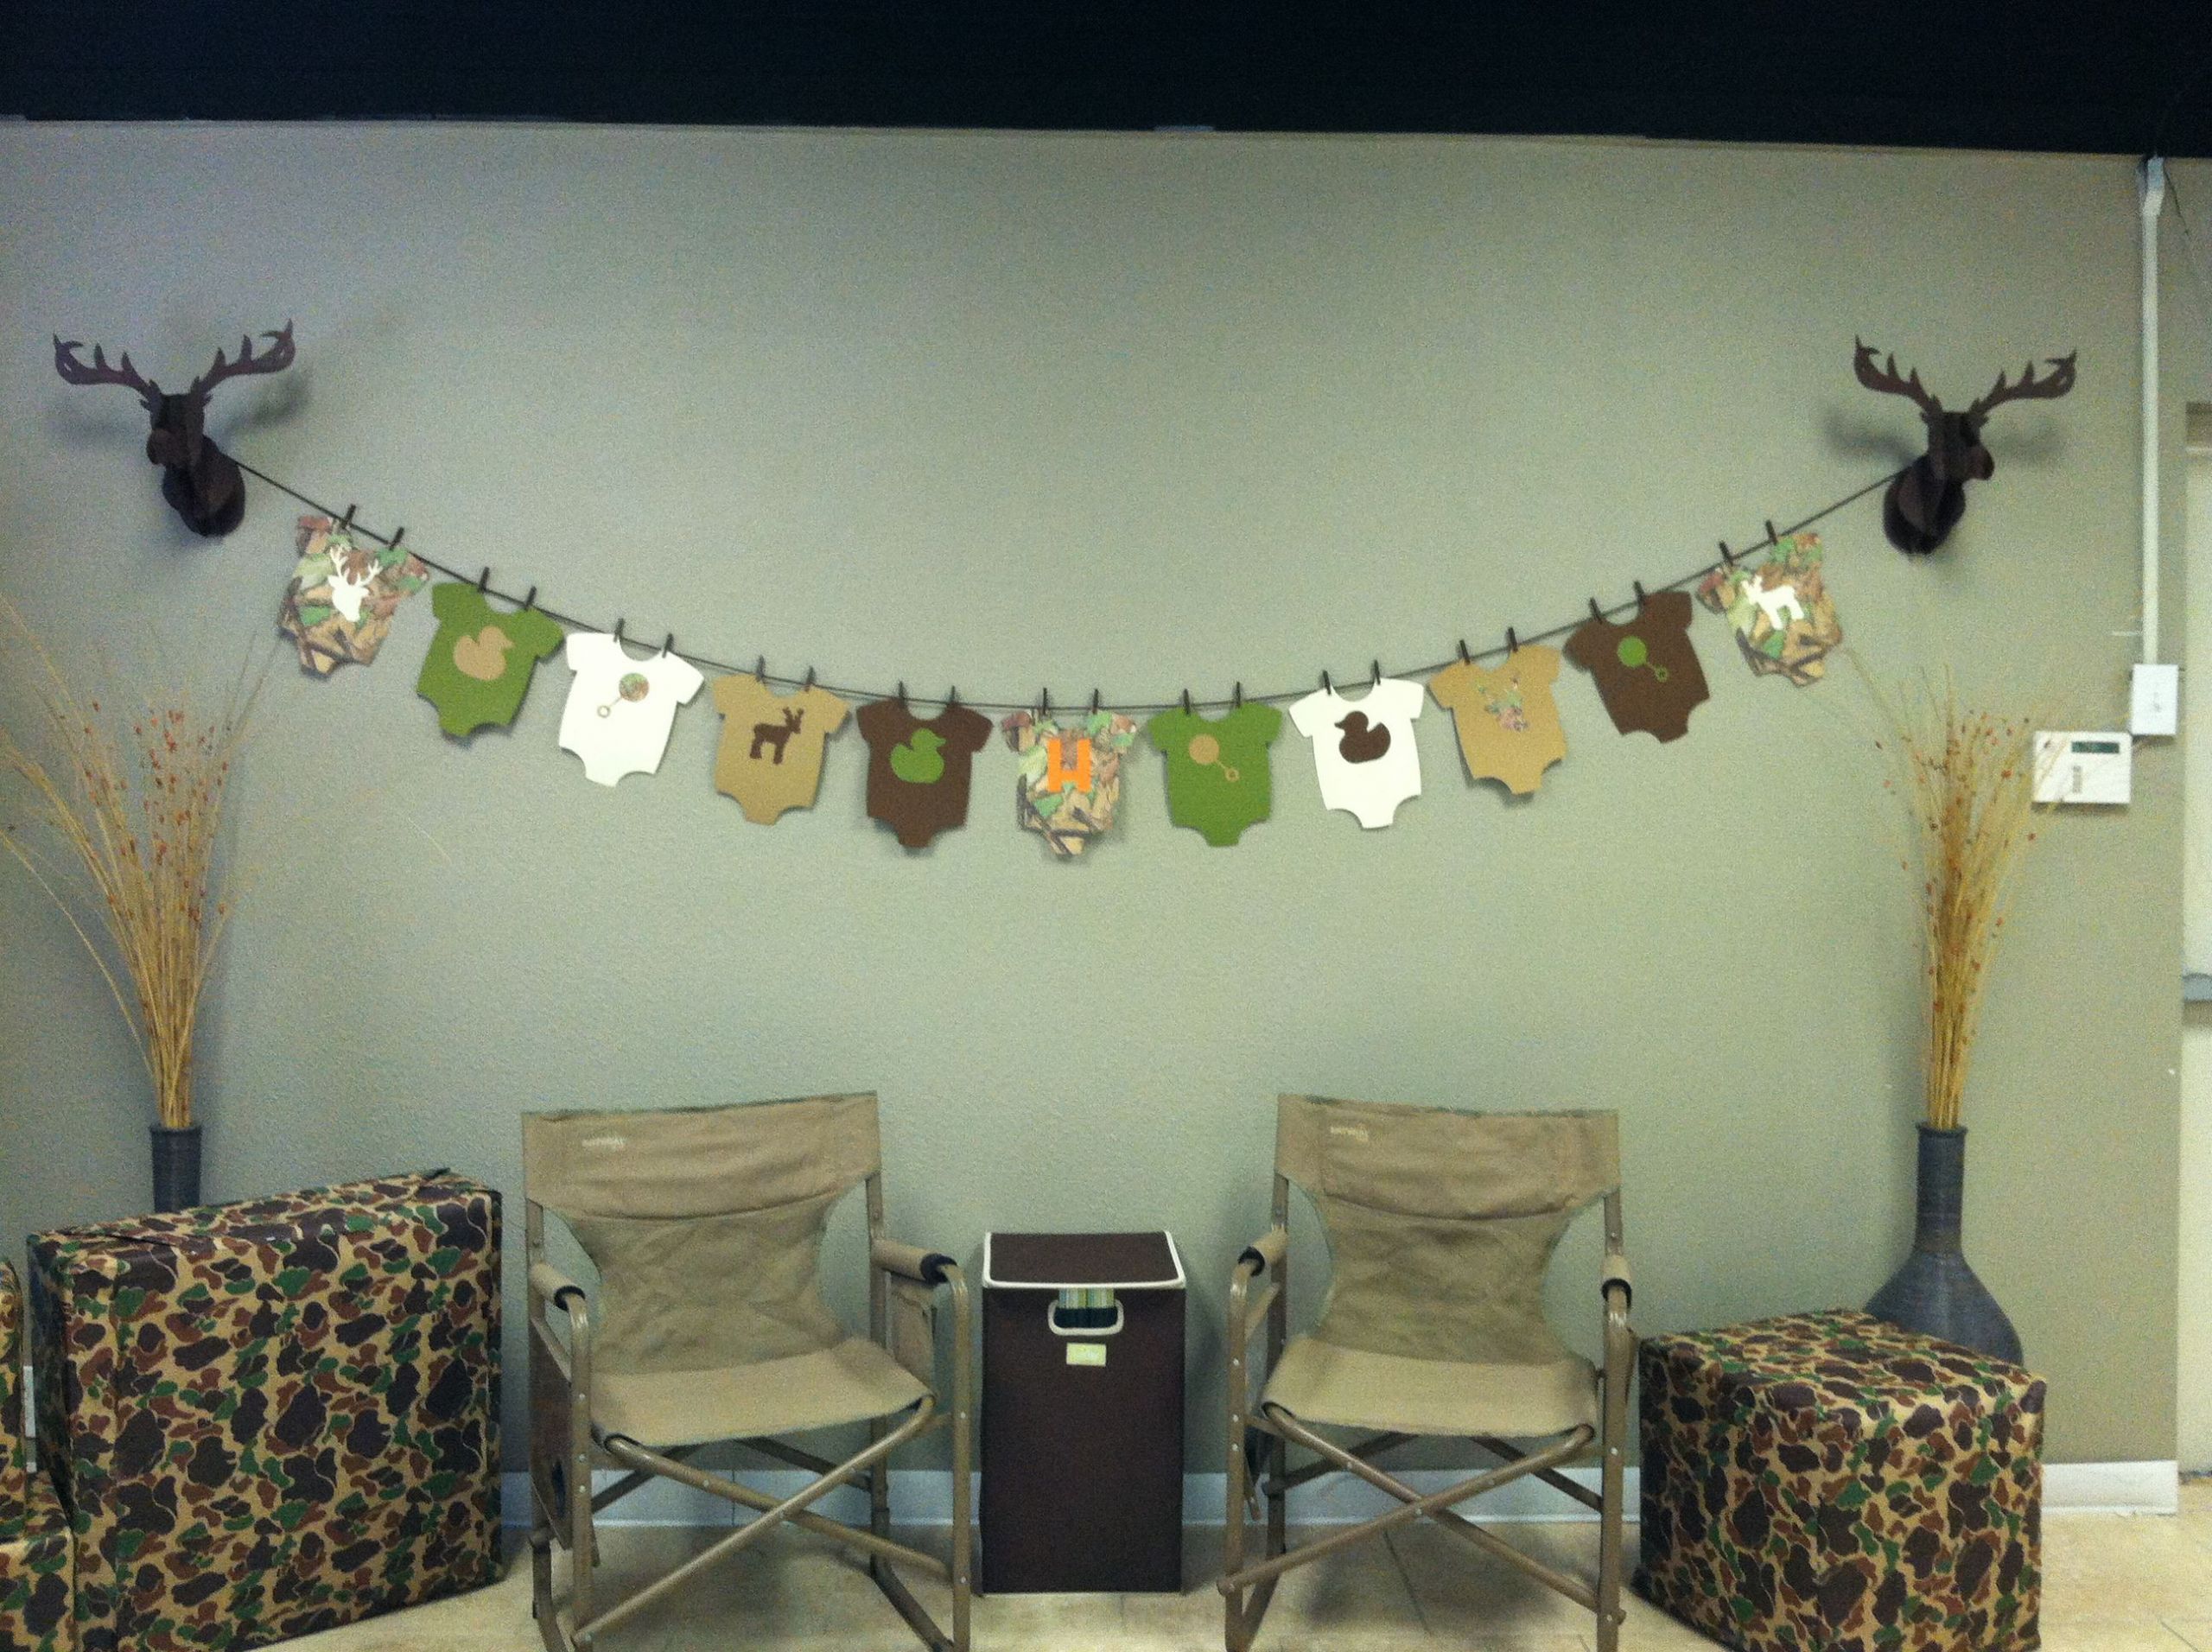 Camouflage Baby Shower Decorating Ideas
 Camouflage baby shower